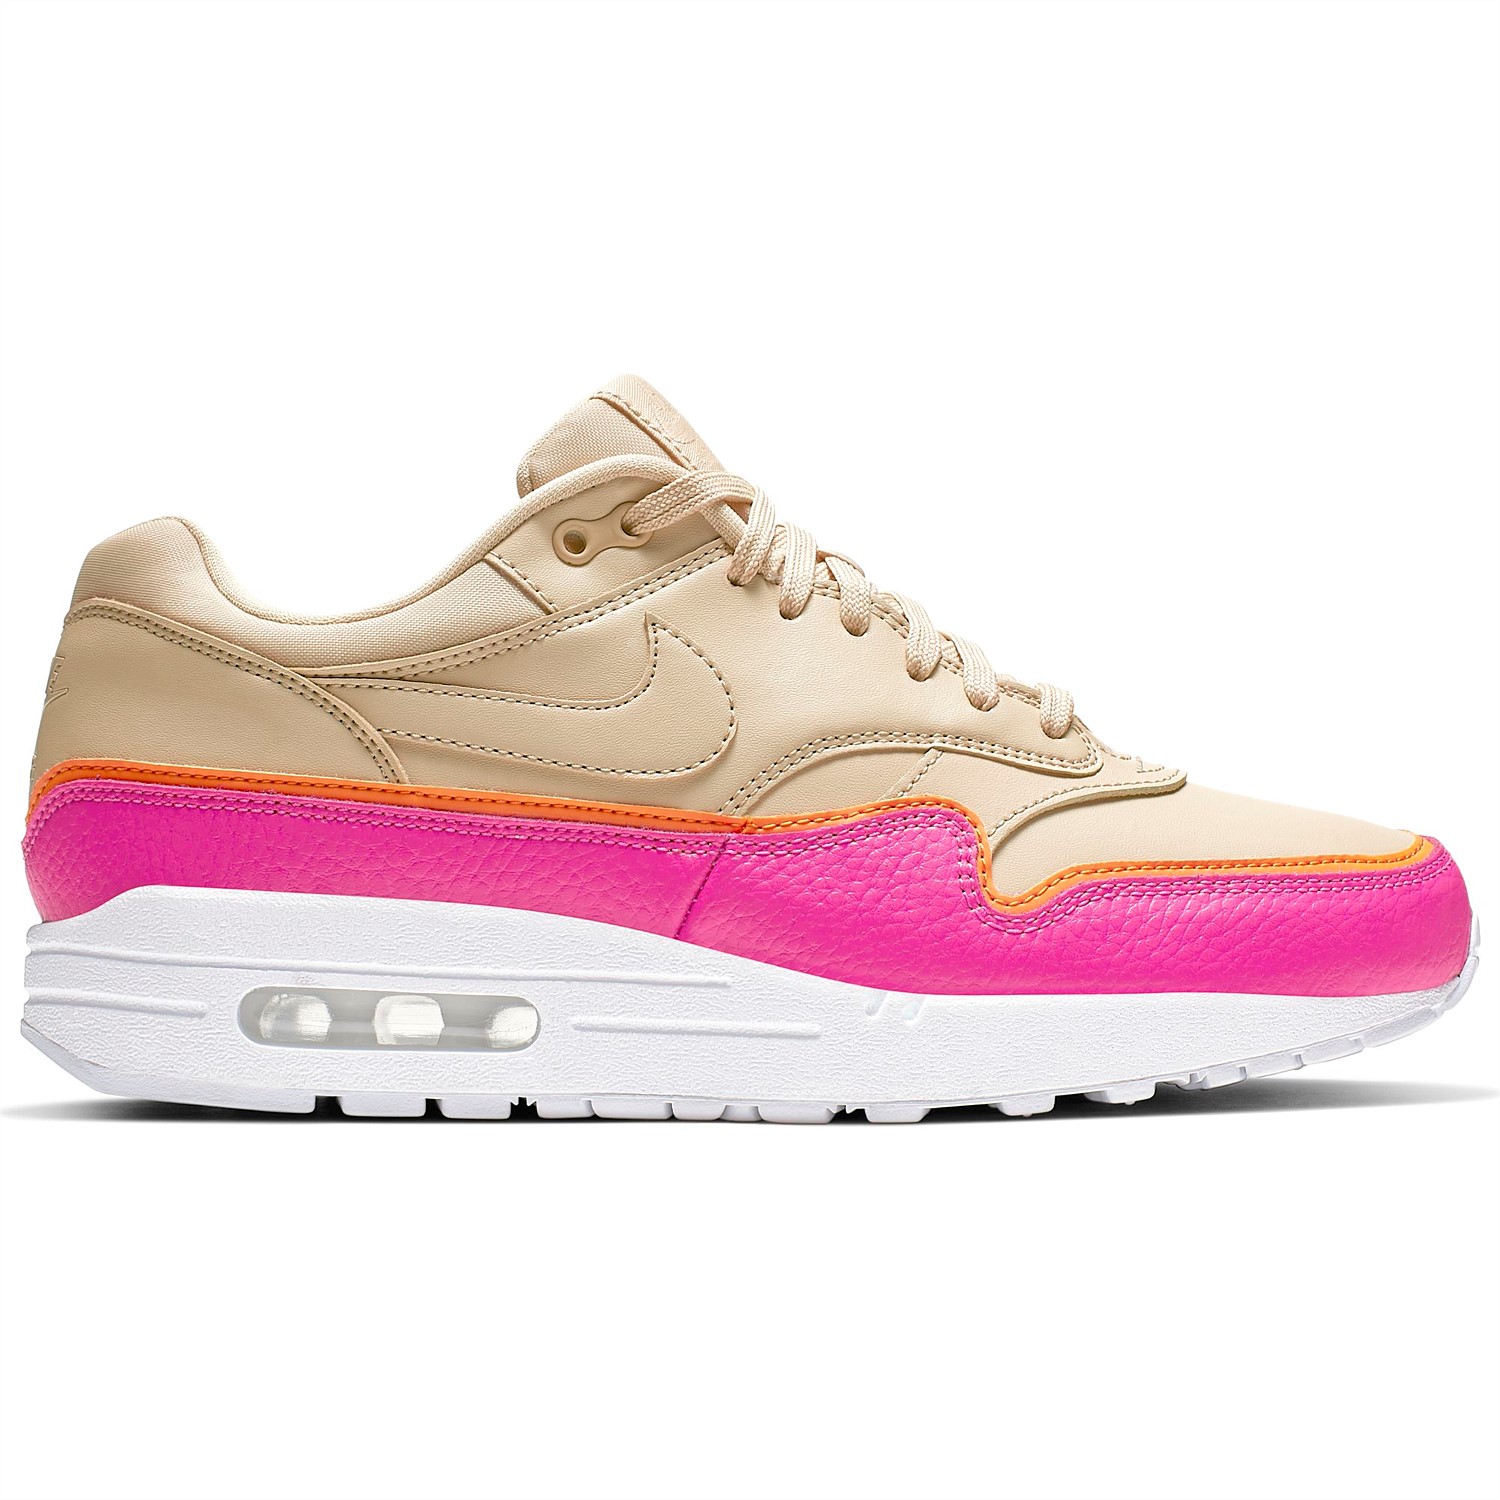 Air Max 1 SE Overbranded Womens